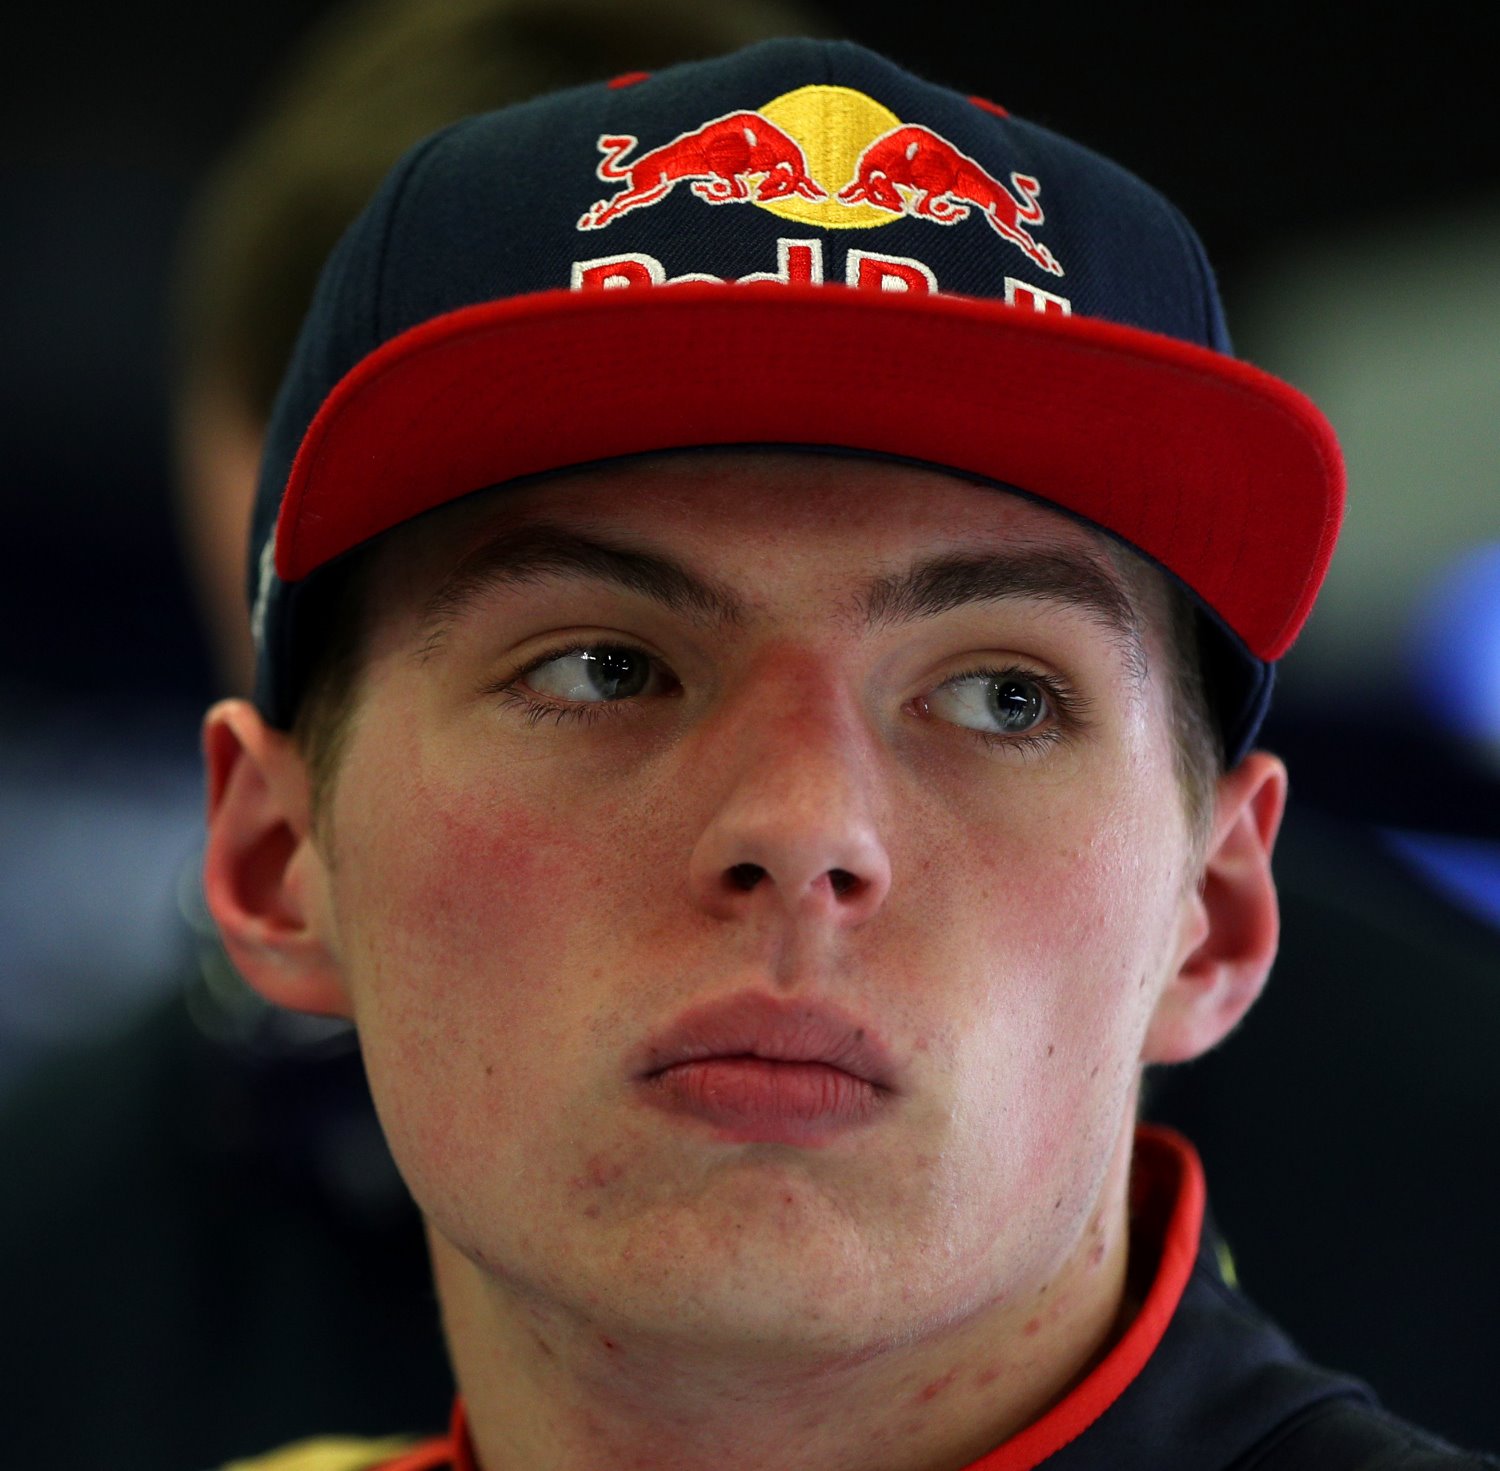 Max Verstappen disappointed